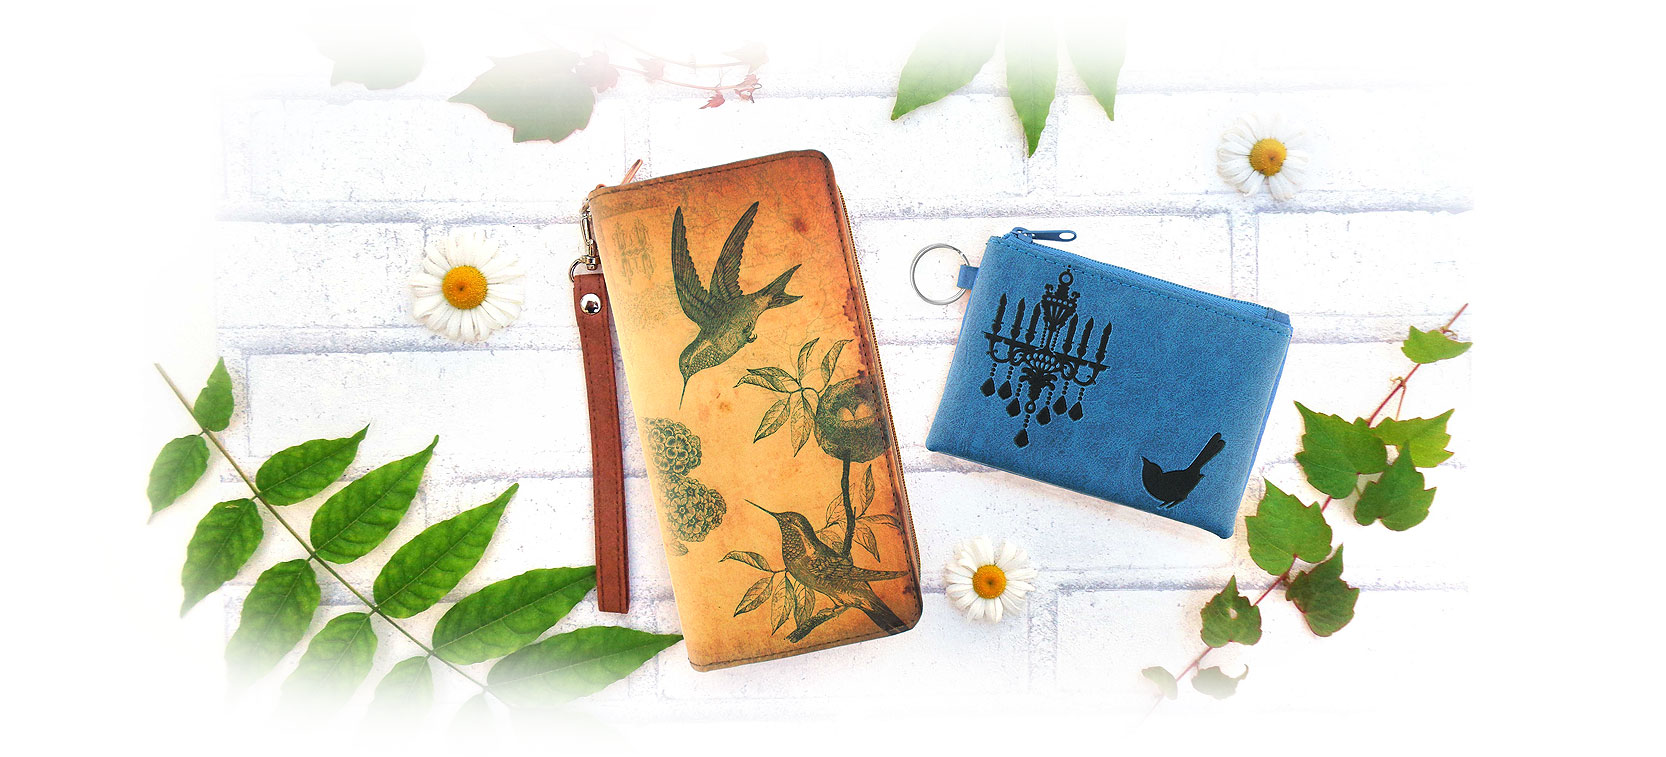 LAVISHY design and wholesale bird themed vegan accessories and gfits to gift shops, boutiques and garden centers, botanical garden gift stores in Canada, USA and worldwide.